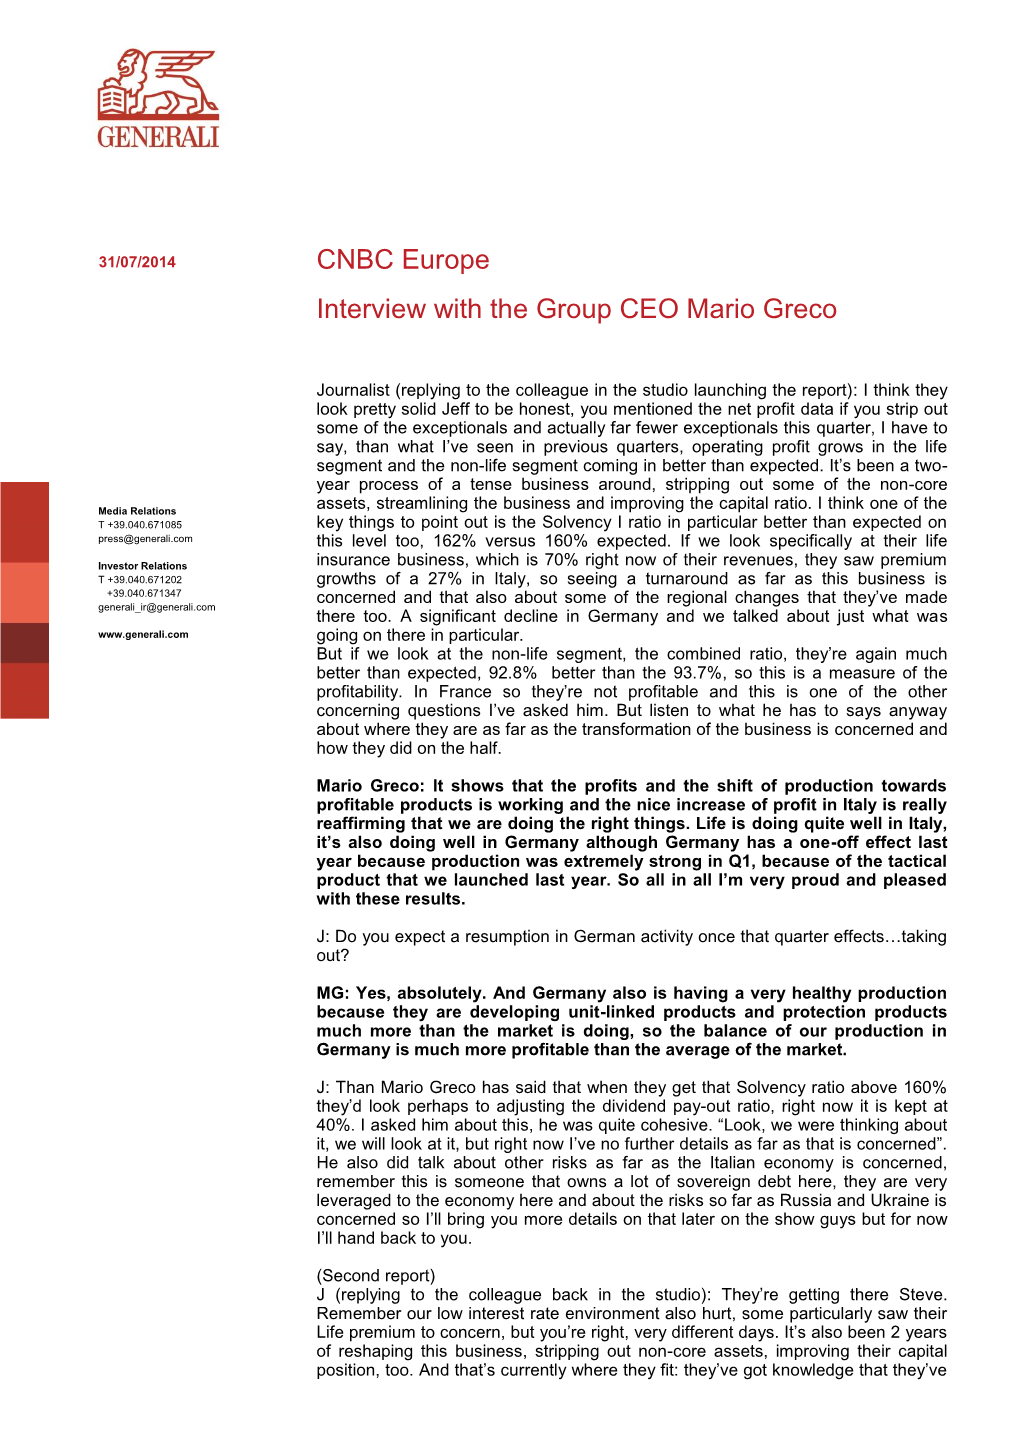 CNBC Europe Interview with the Group CEO Mario Greco